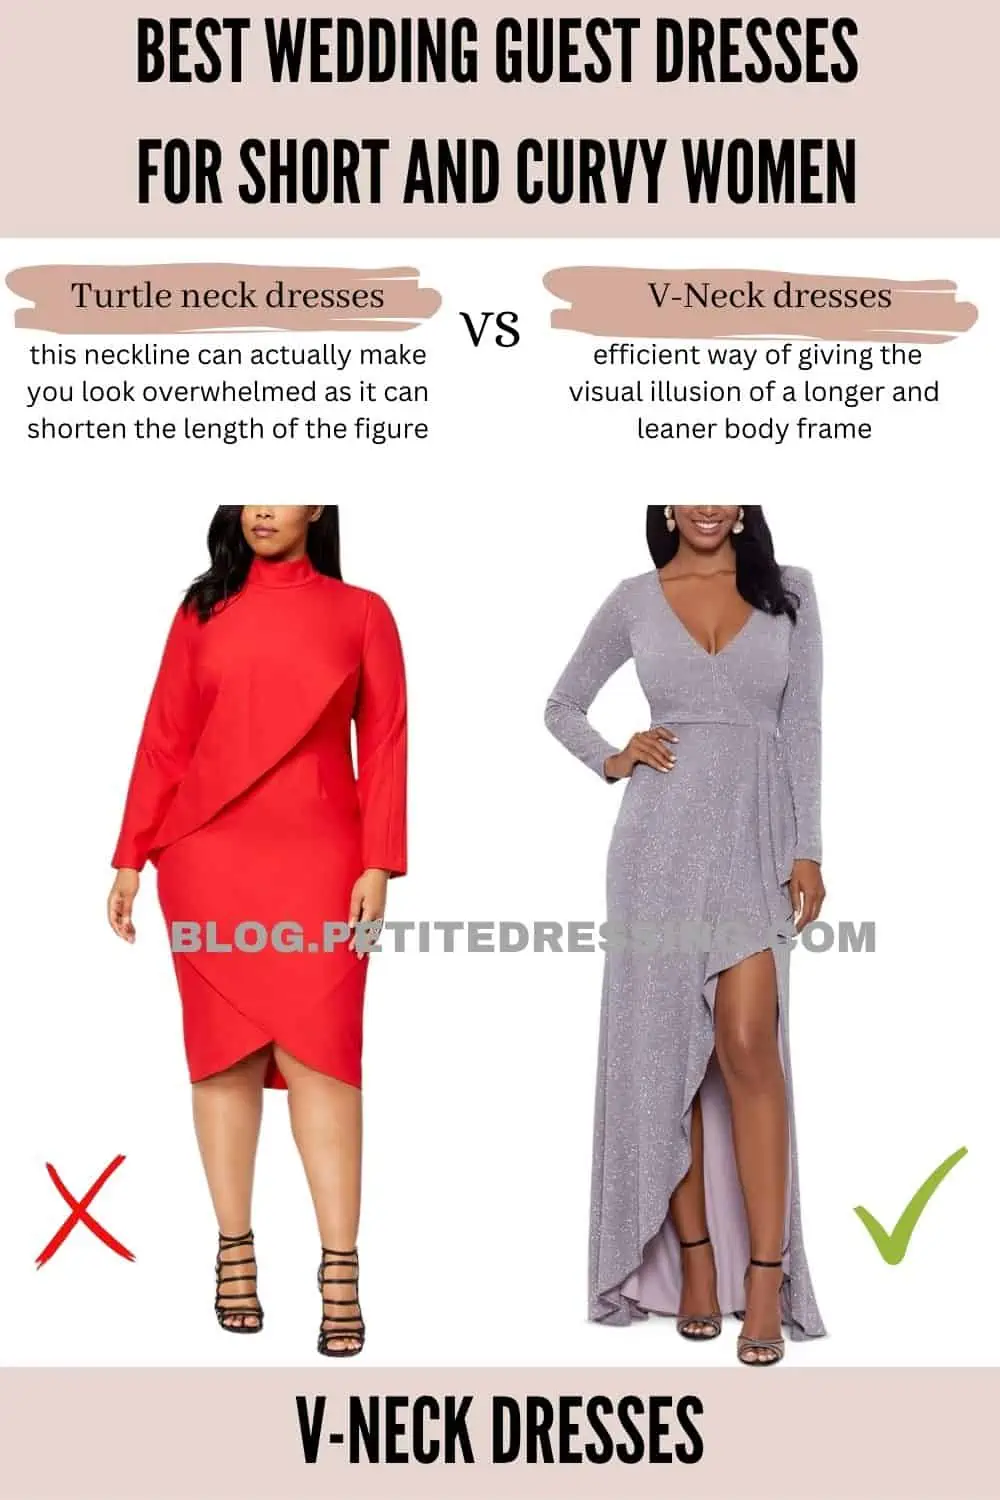 Wedding Guest Dresses Guide for Short and Curvy Women - Petite Dressing